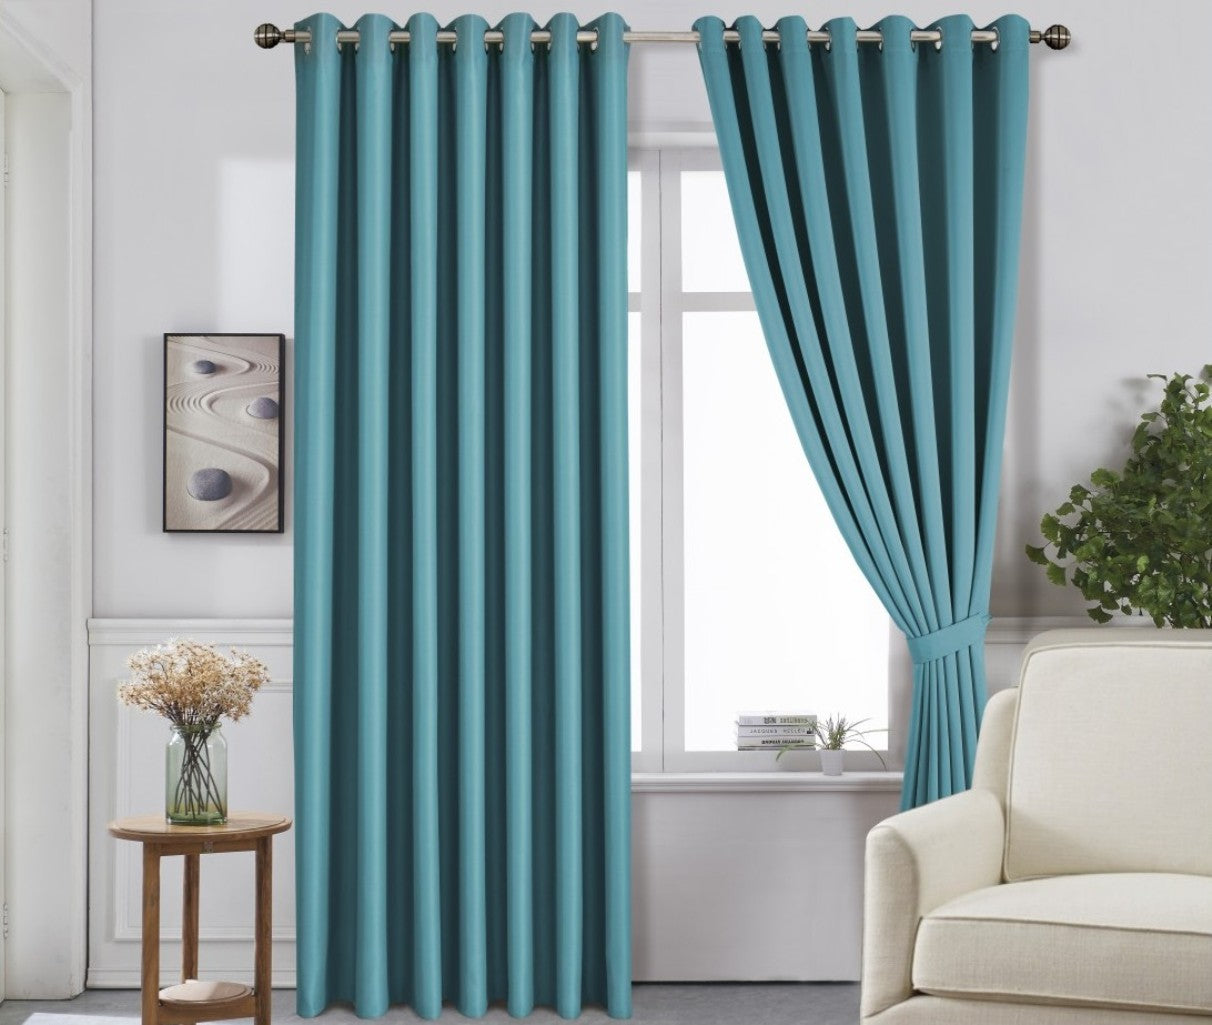 Extra Long 300cm Teal Blackout Curtain Pair 96" x 118" Two Tie Backs Included